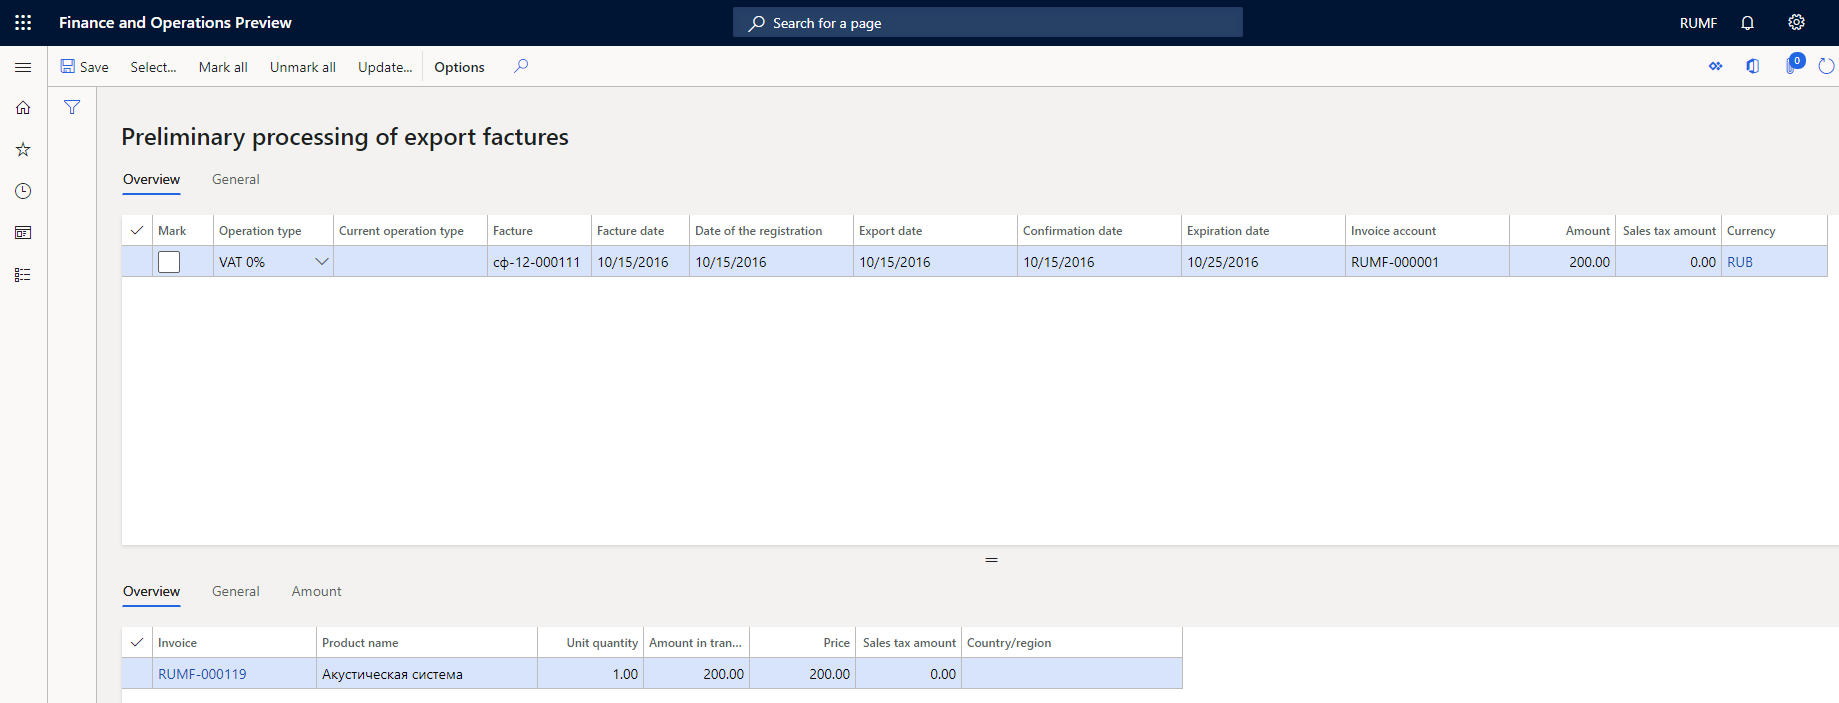 Preliminary processing of export factures page.